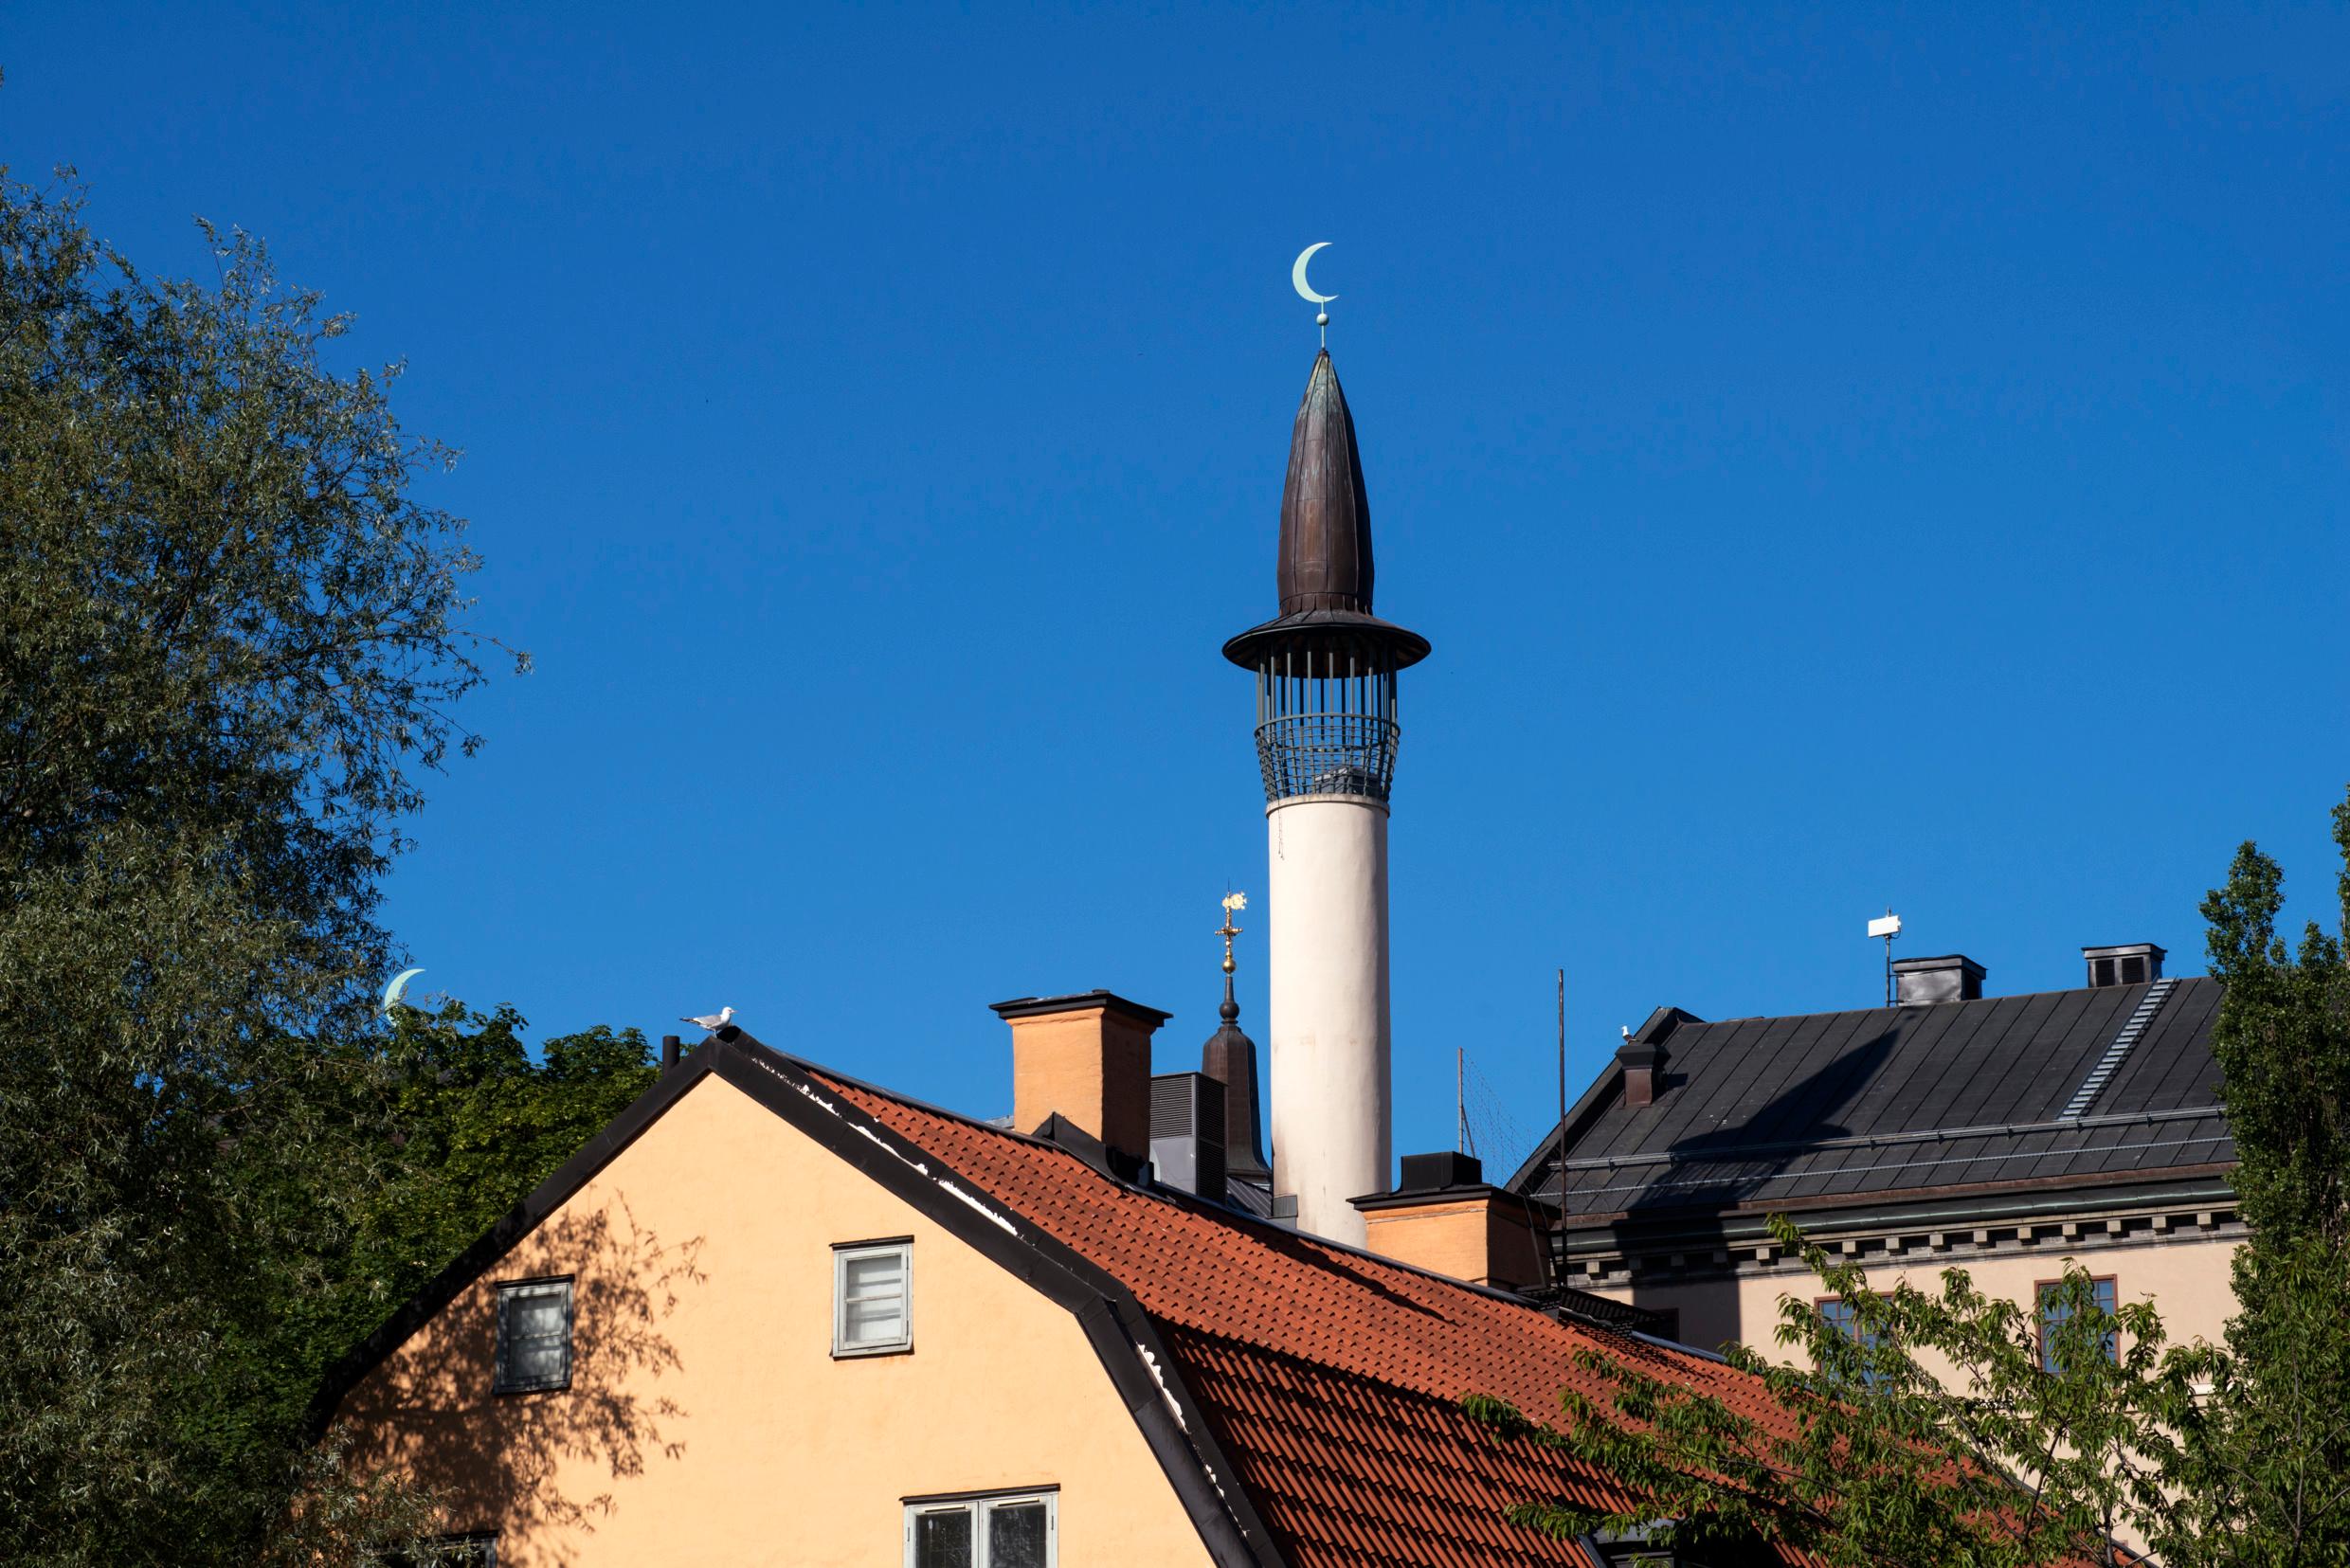 The minaret of the Stockholm Mosque against a blue sky.